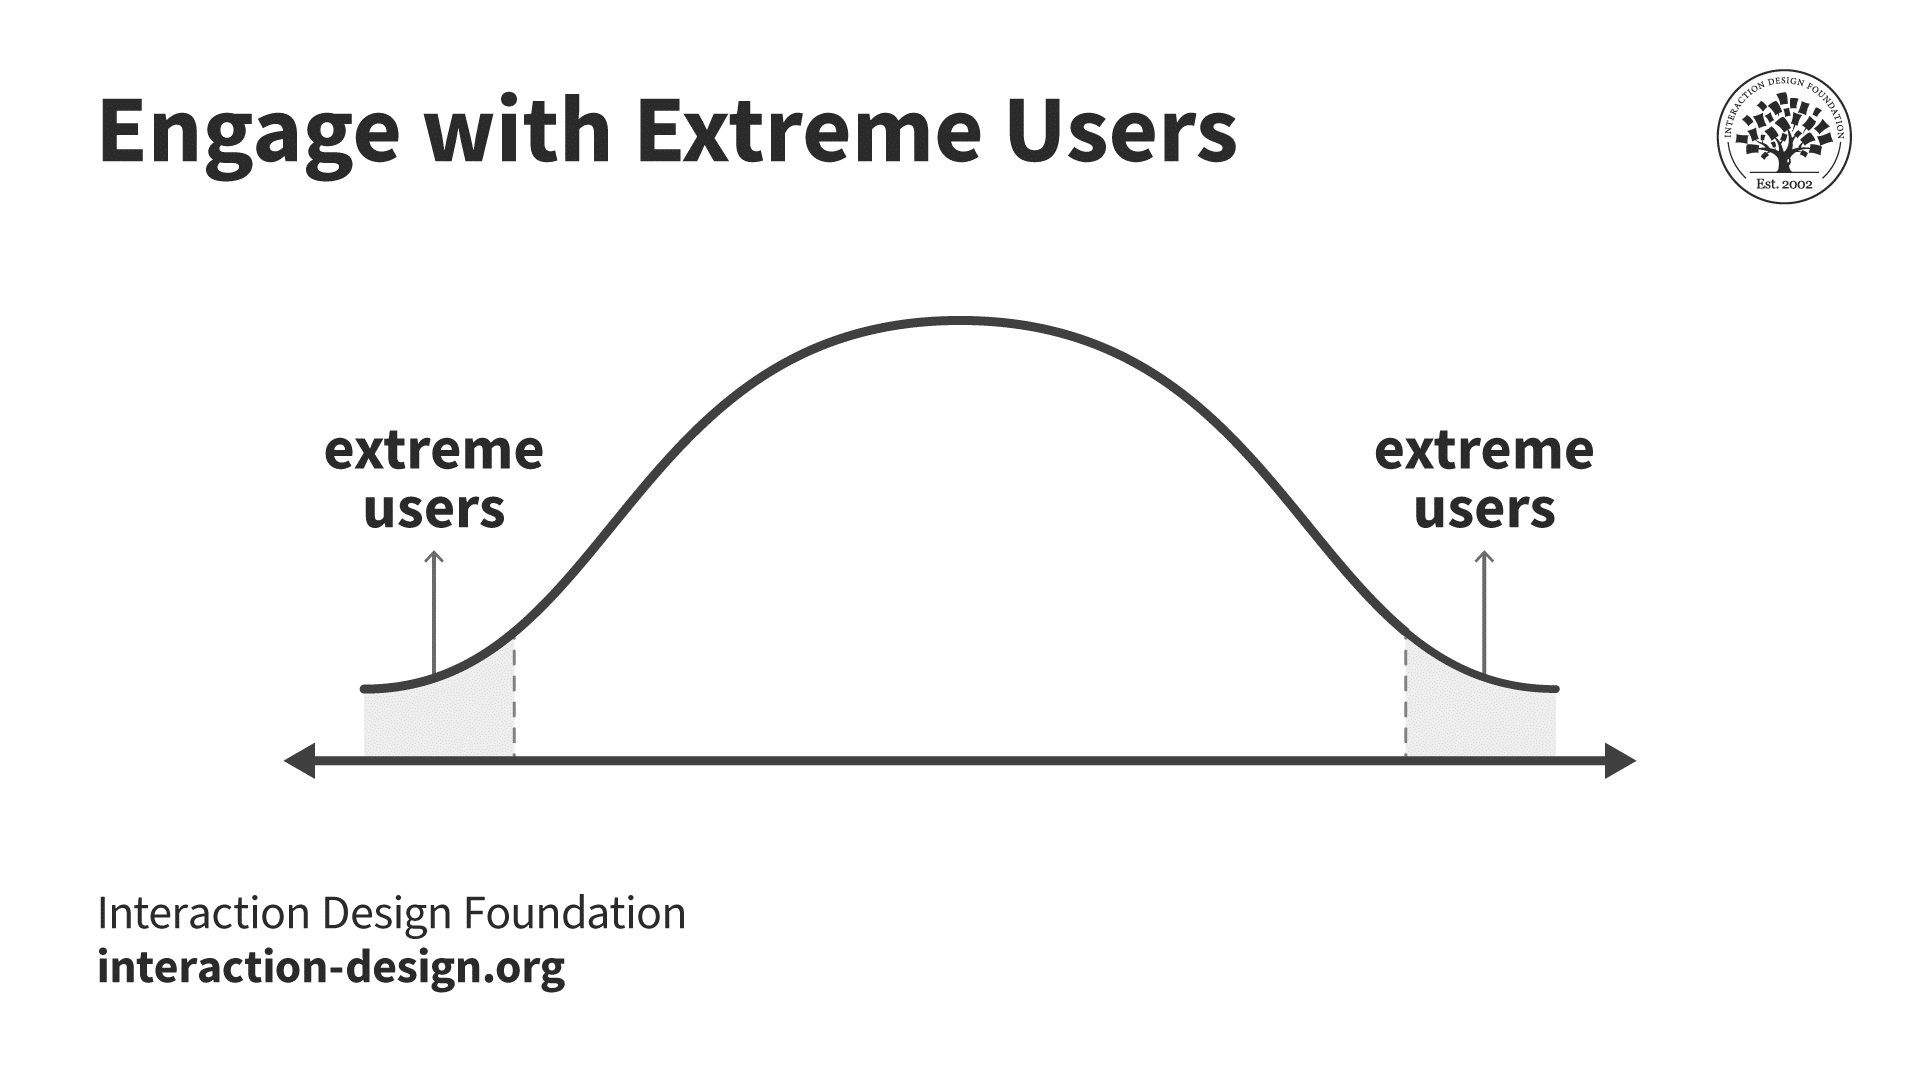 A bell curve detailing where extreme users lie. In the example, users that match the targeted height, age, and weight are in the middle of the curve. These users make up most research participants. Users who do not match the targeted audience, also known as extreme users, are on the edges of the curve.